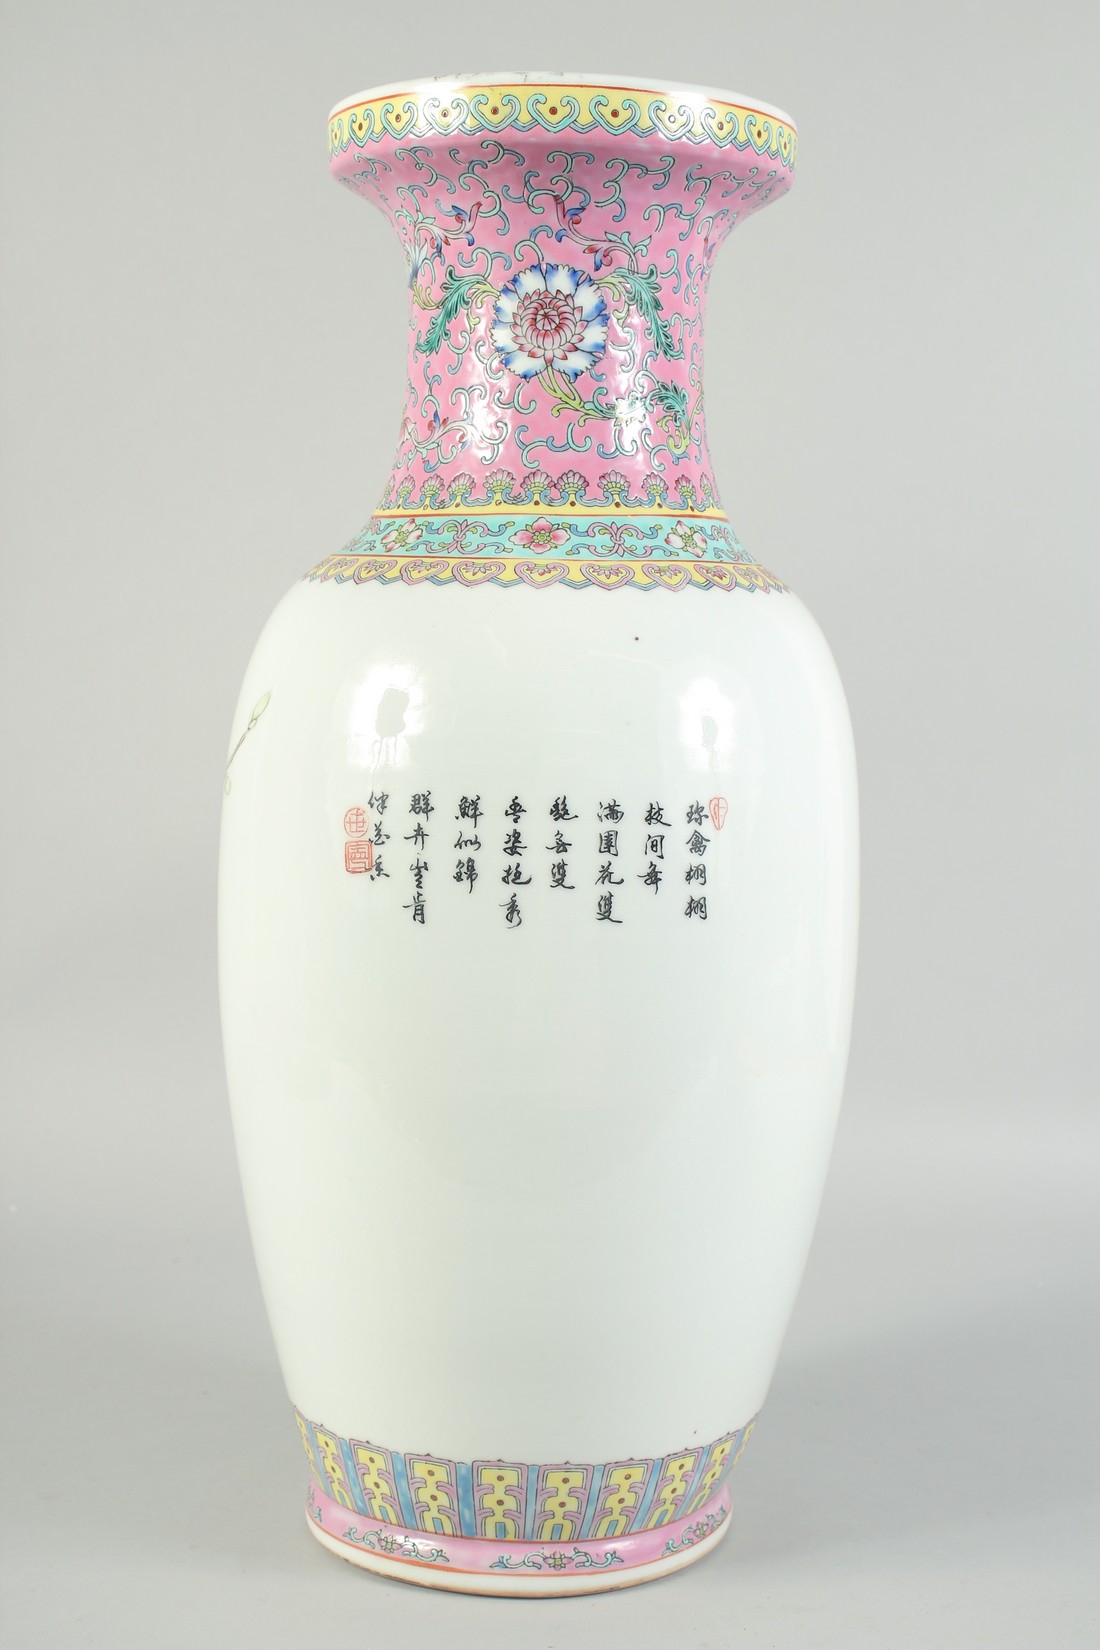 A CHINESE PORCELAIN REPUBLIC VASE with birds and calligraphy. 19ins high. - Image 3 of 5